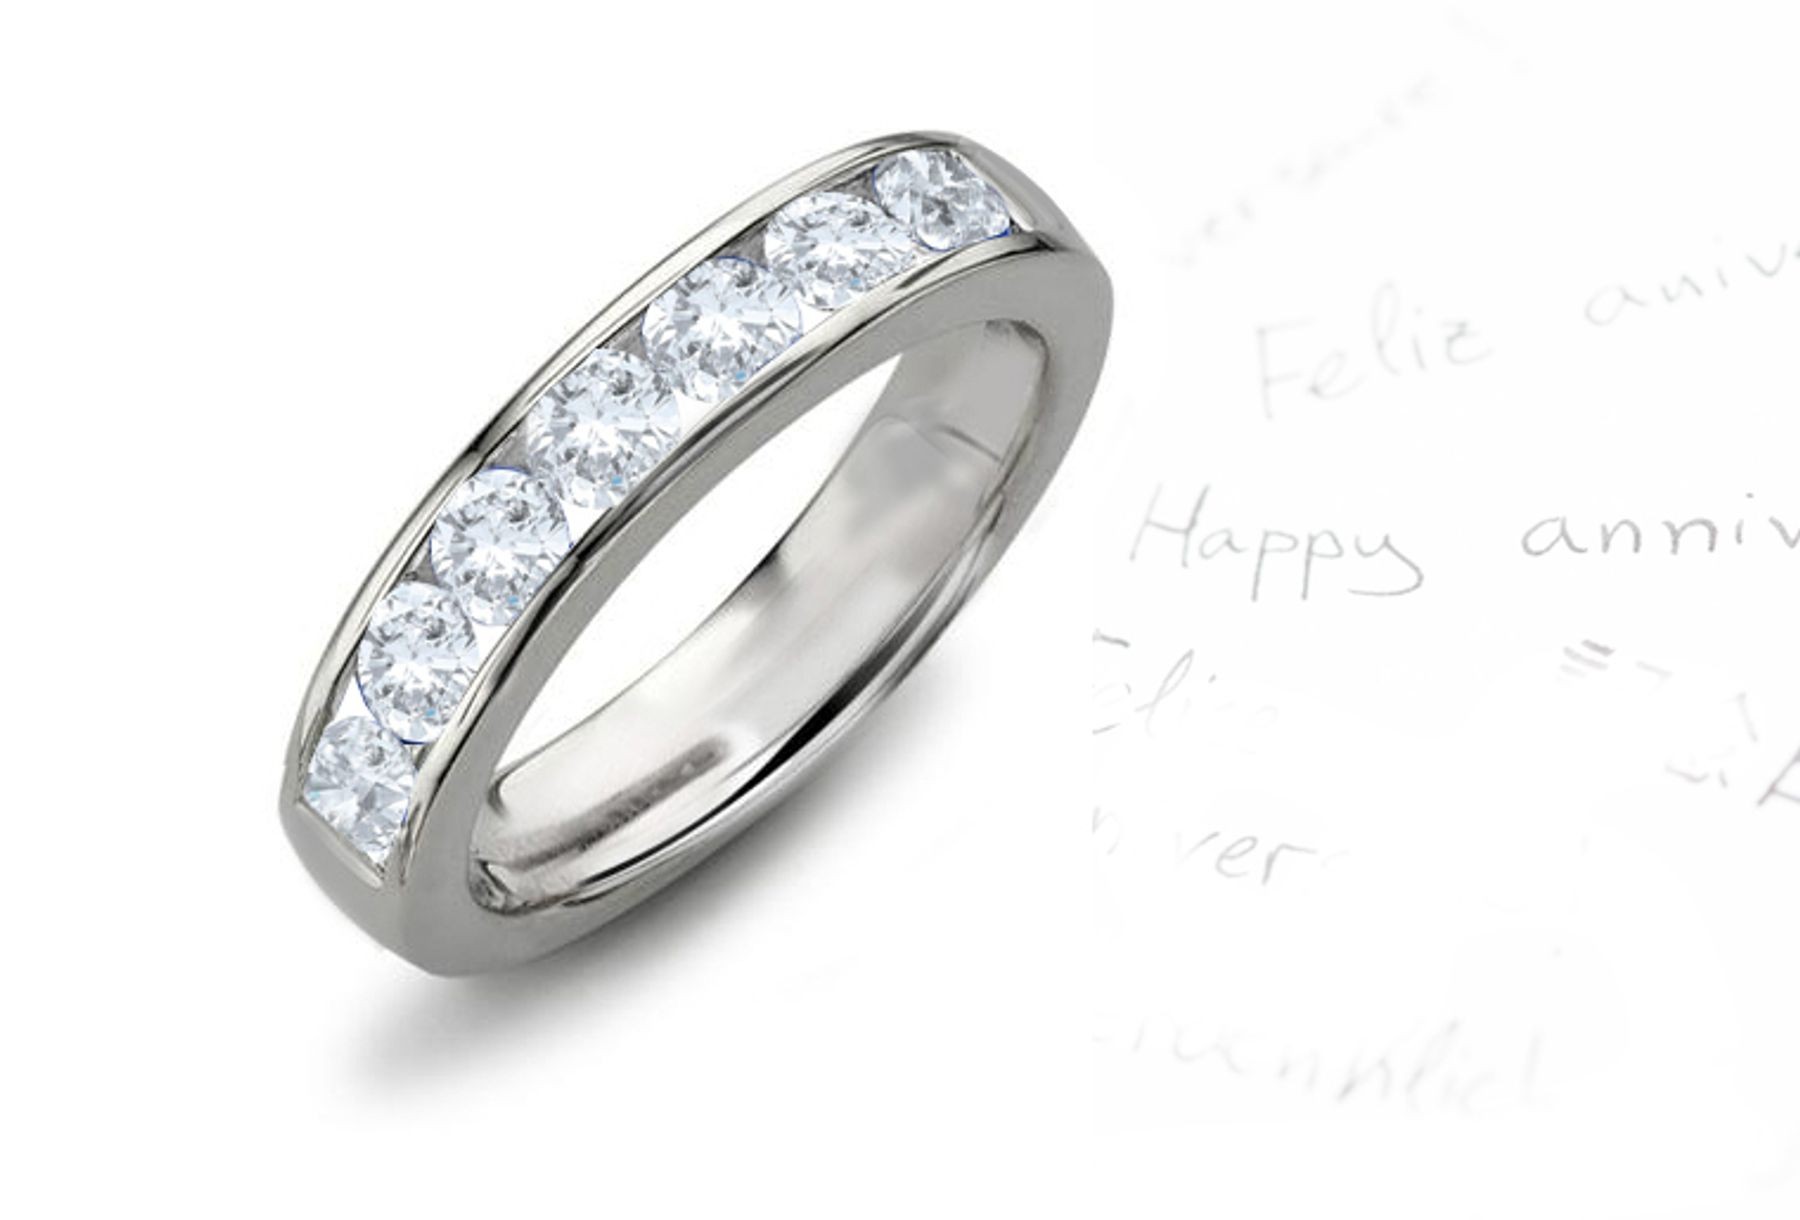 Anniversary Seven Channel Set Round Diamonds Ring with 1.0 cts tw Mens Ring Size 9 to 12